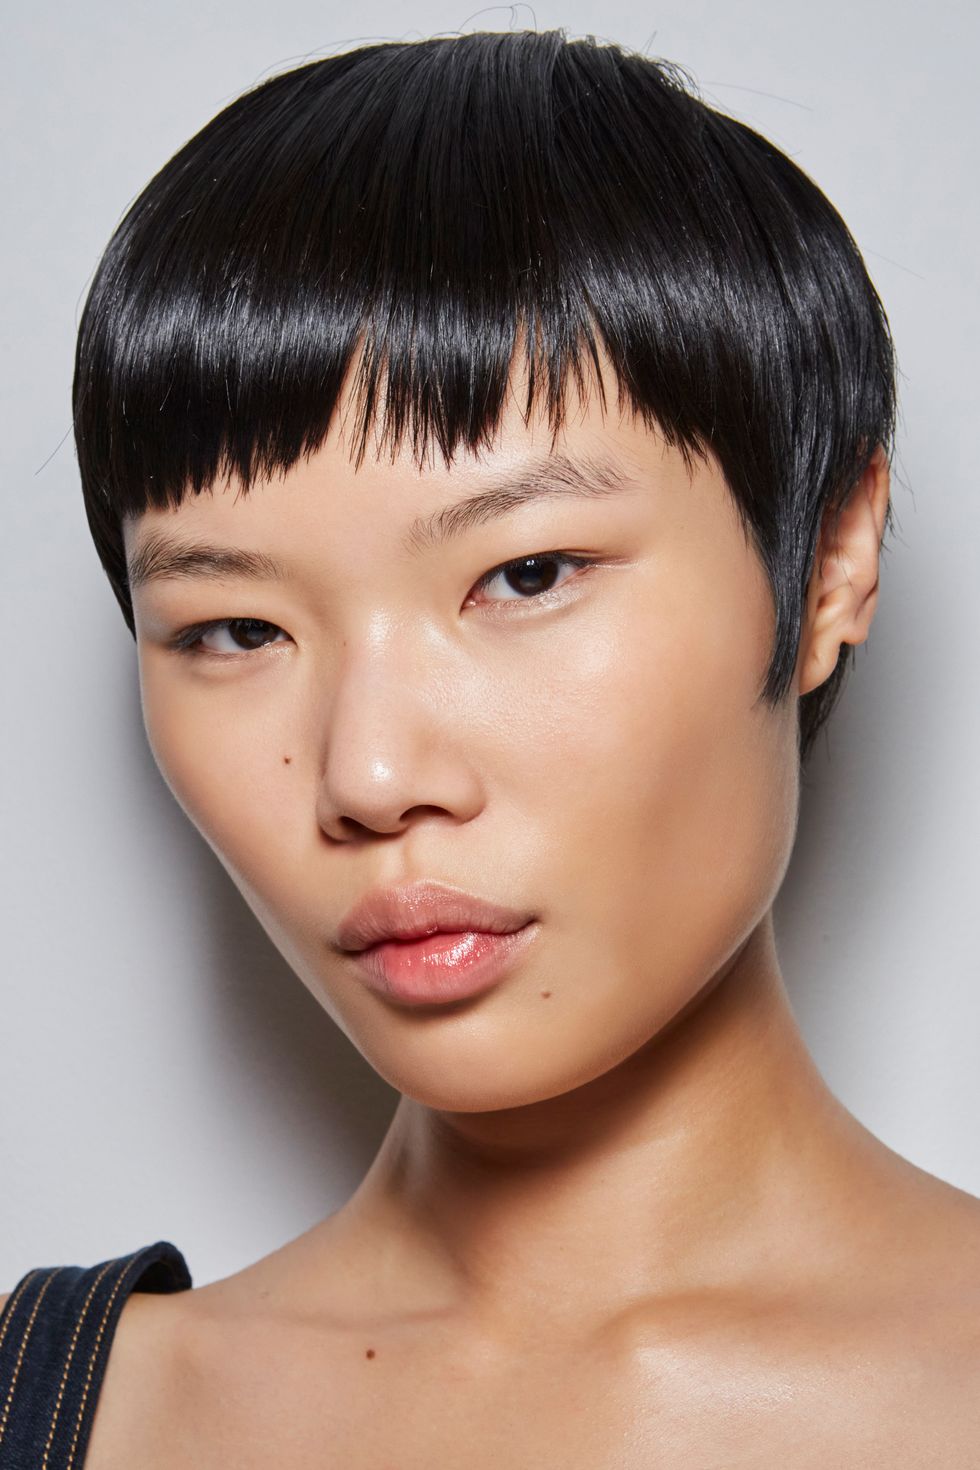 The 6 Top Hair Trends of 2024, According to the Experts